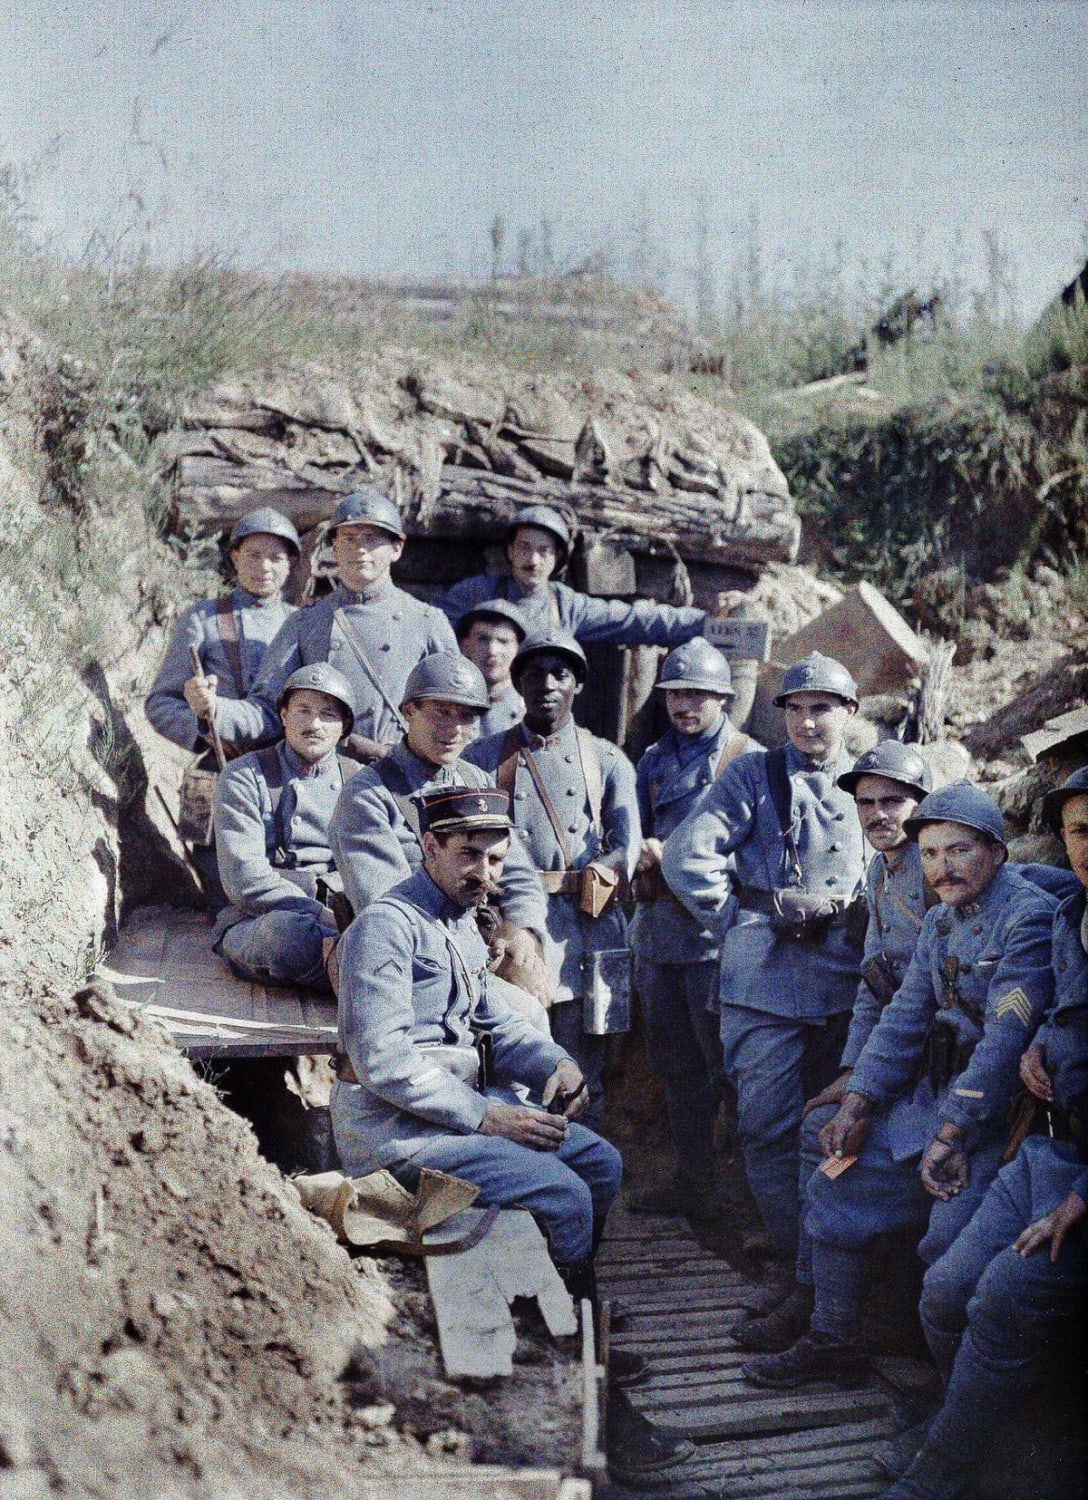 French 'poilus' ('hairy ones') soldiers posing in a trench, 16 June 1917. Note: this is an 'Autochrome' photograph, an early form of colorized photography. This is thus the original photo.